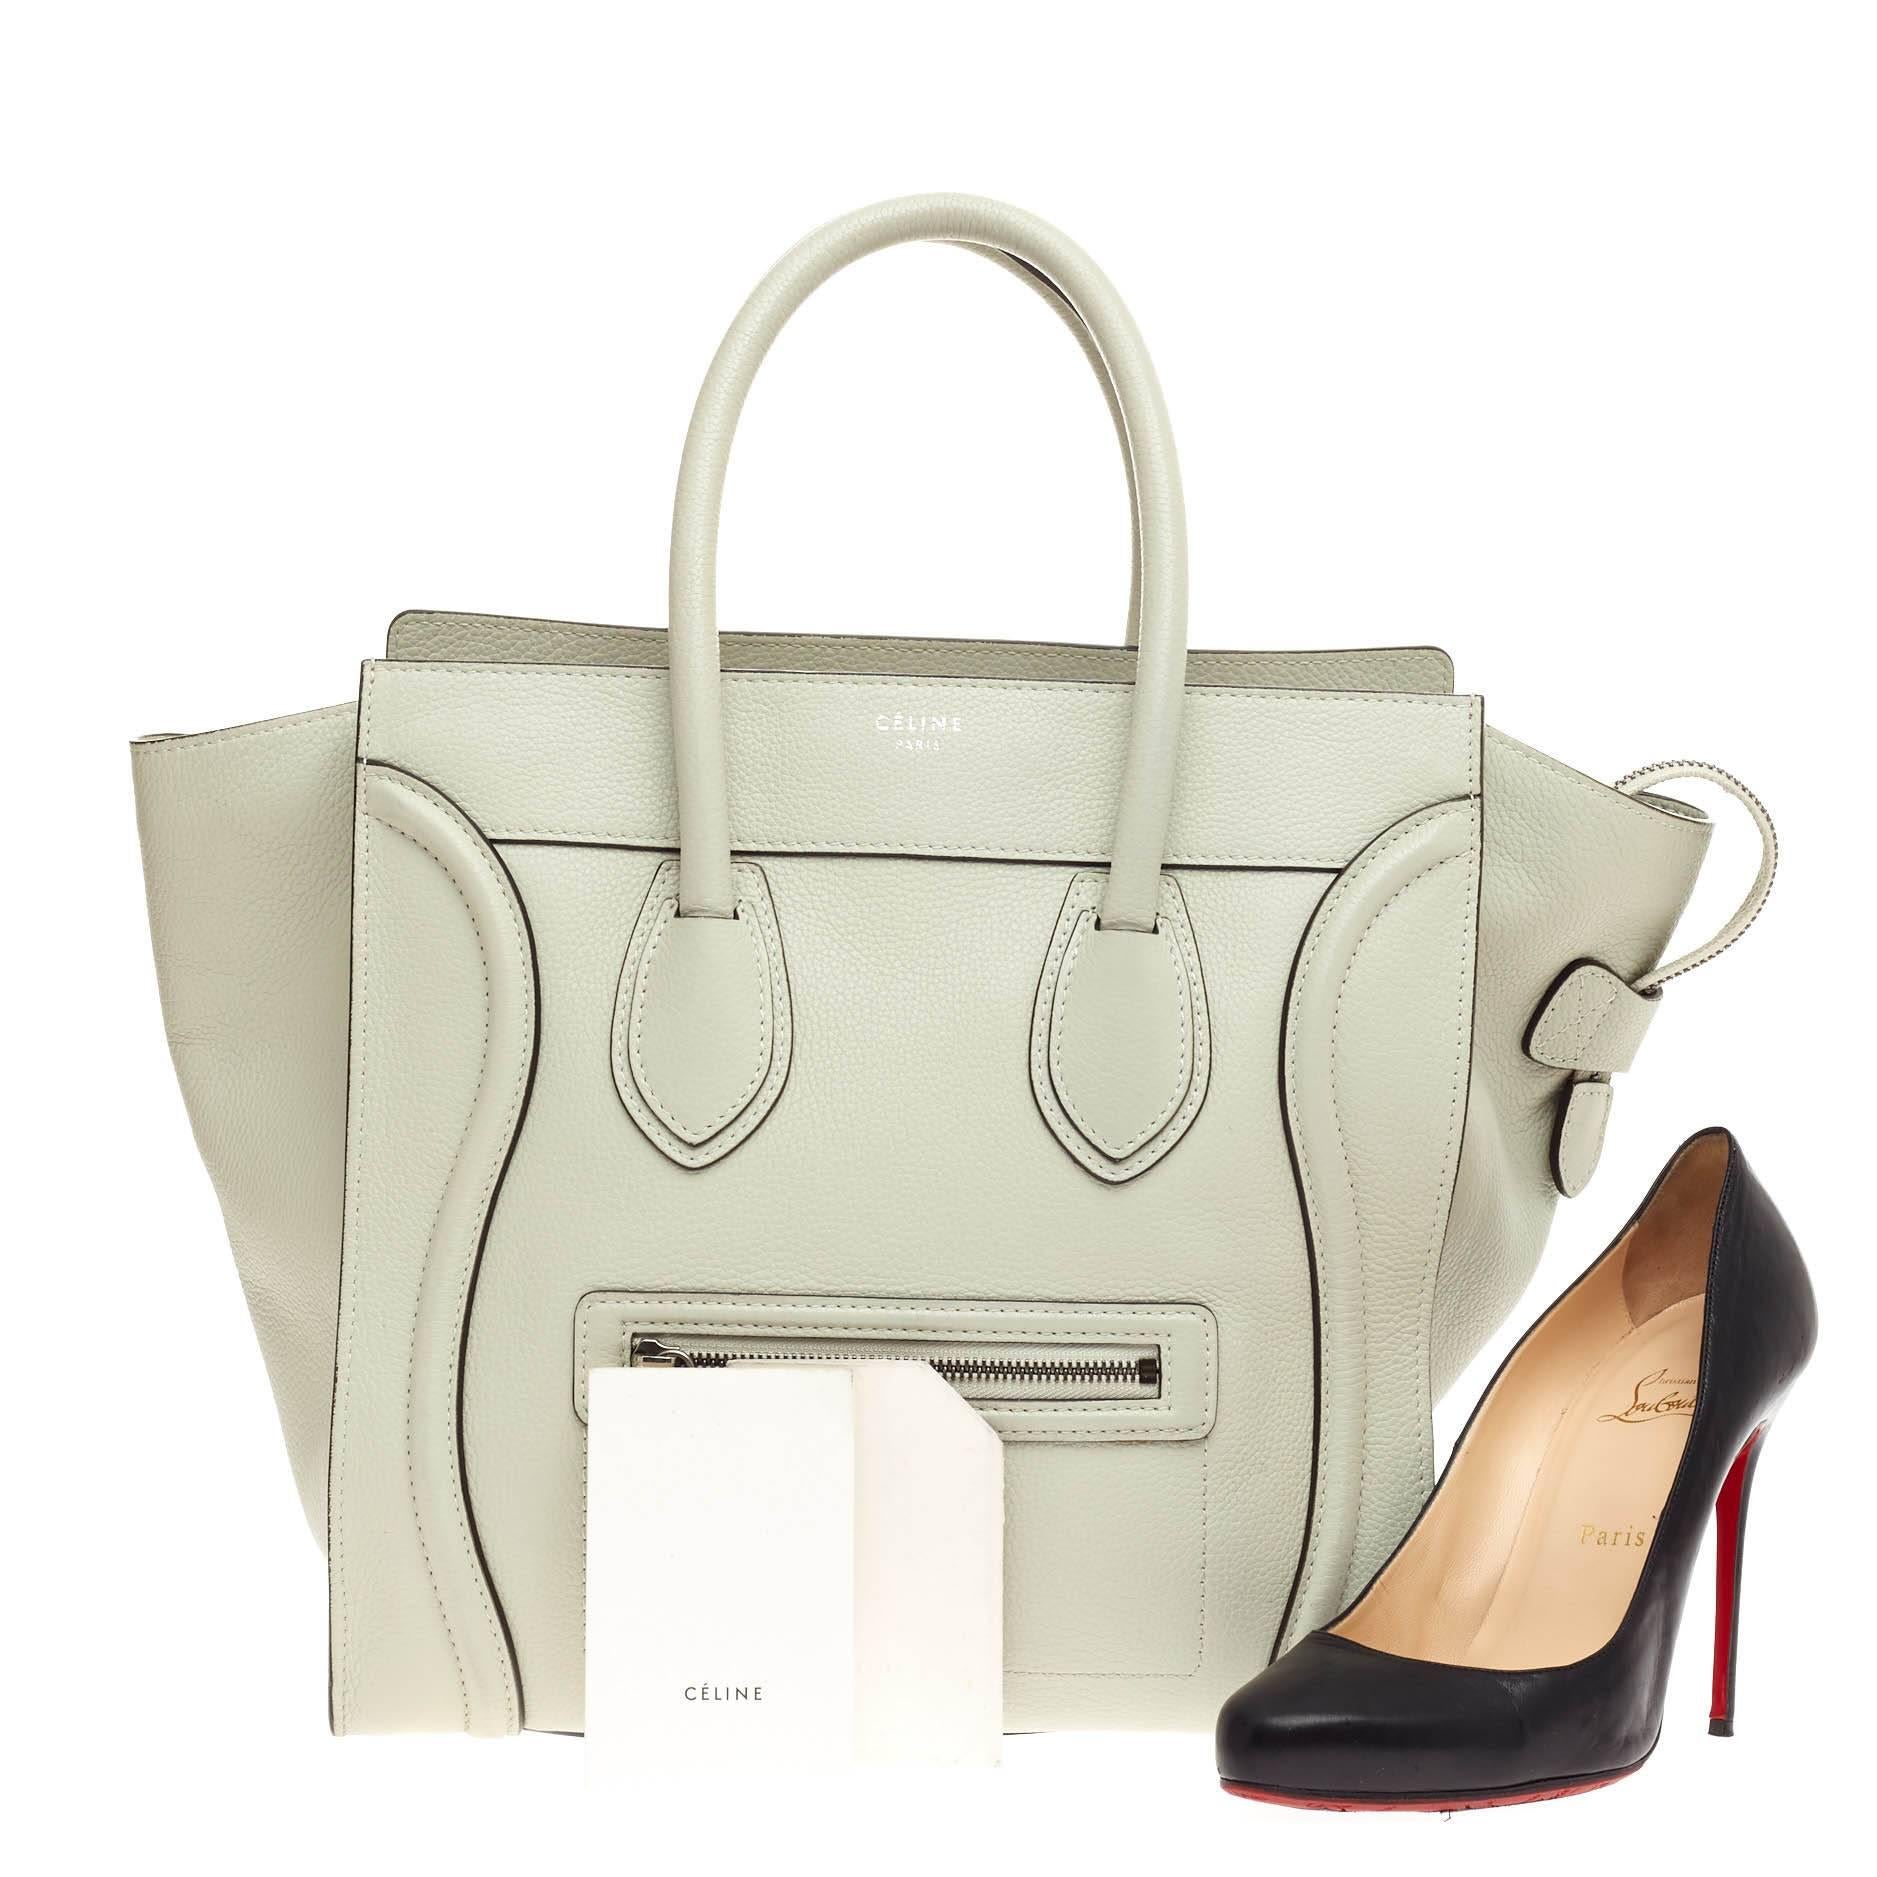 This authentic Celine Luggage Grainy Leather Mini epitomizes Phoebe Philo's minimalist yet chic style. Constructed in pale sea foam green grainy leather, this beloved fashionista's bag features dual-rolled leather handles, a frontal zip pocket,